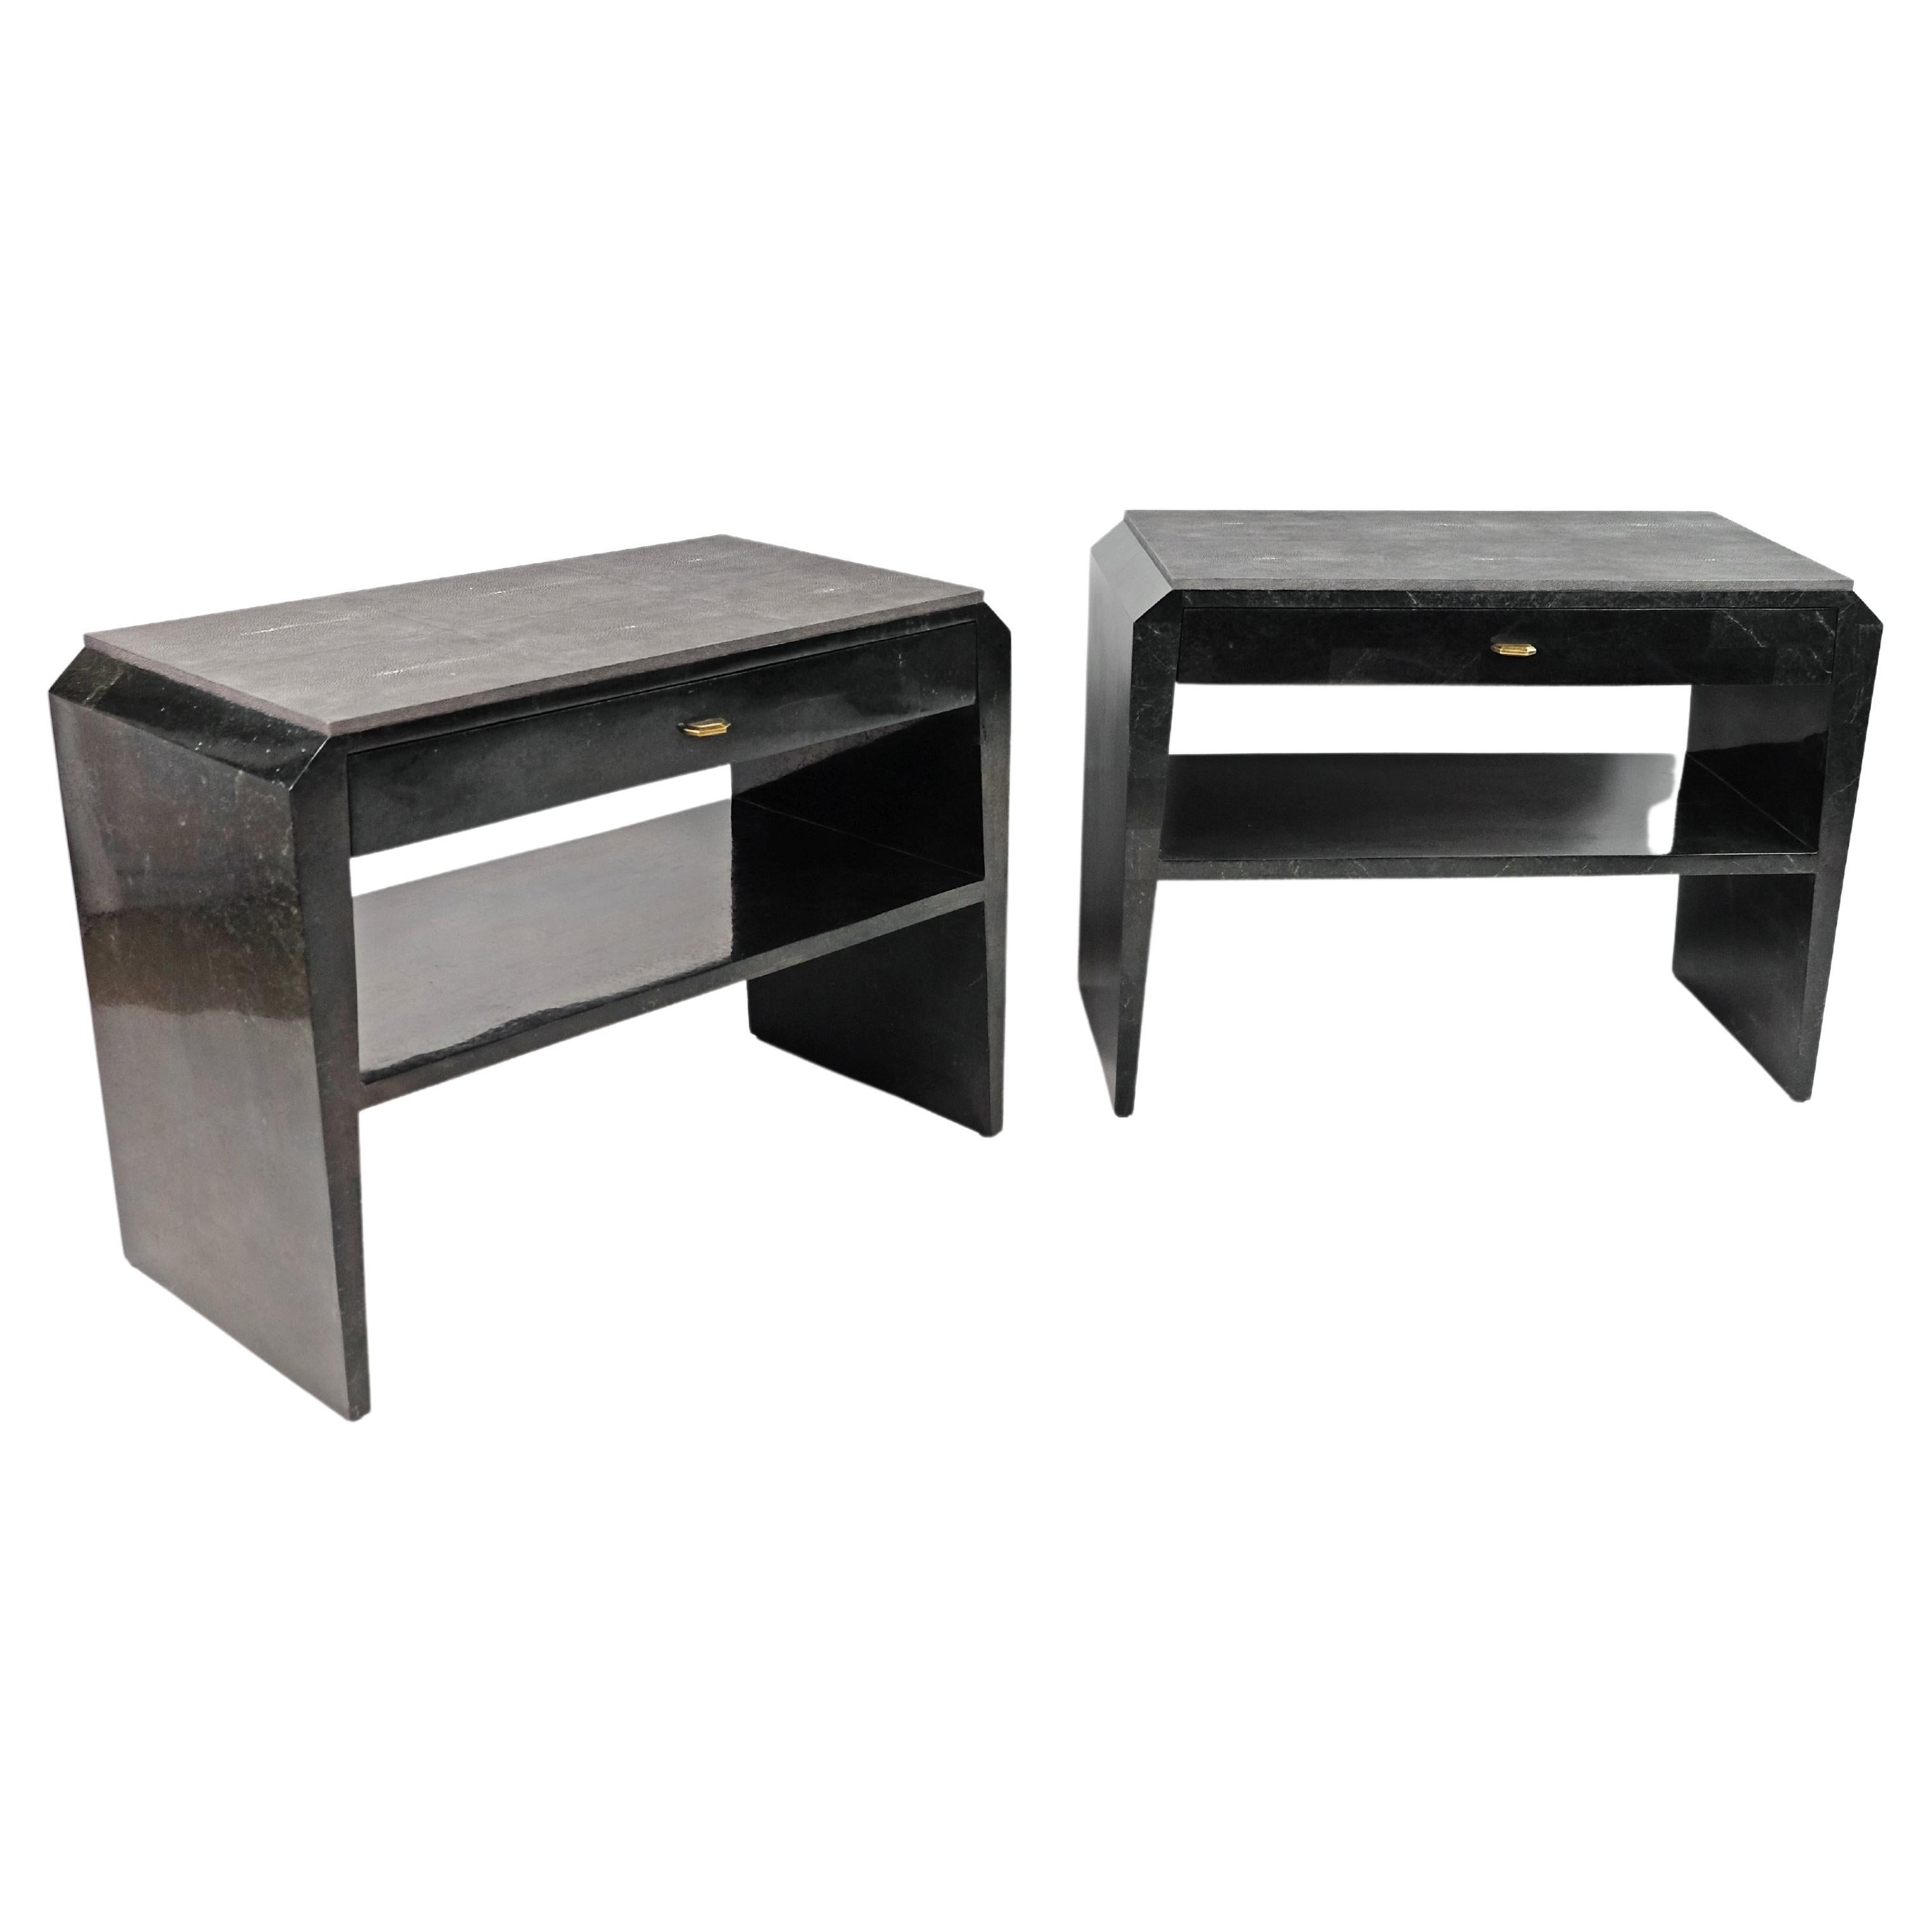 Pair of Bedside Tables in Black Stone Marquetry